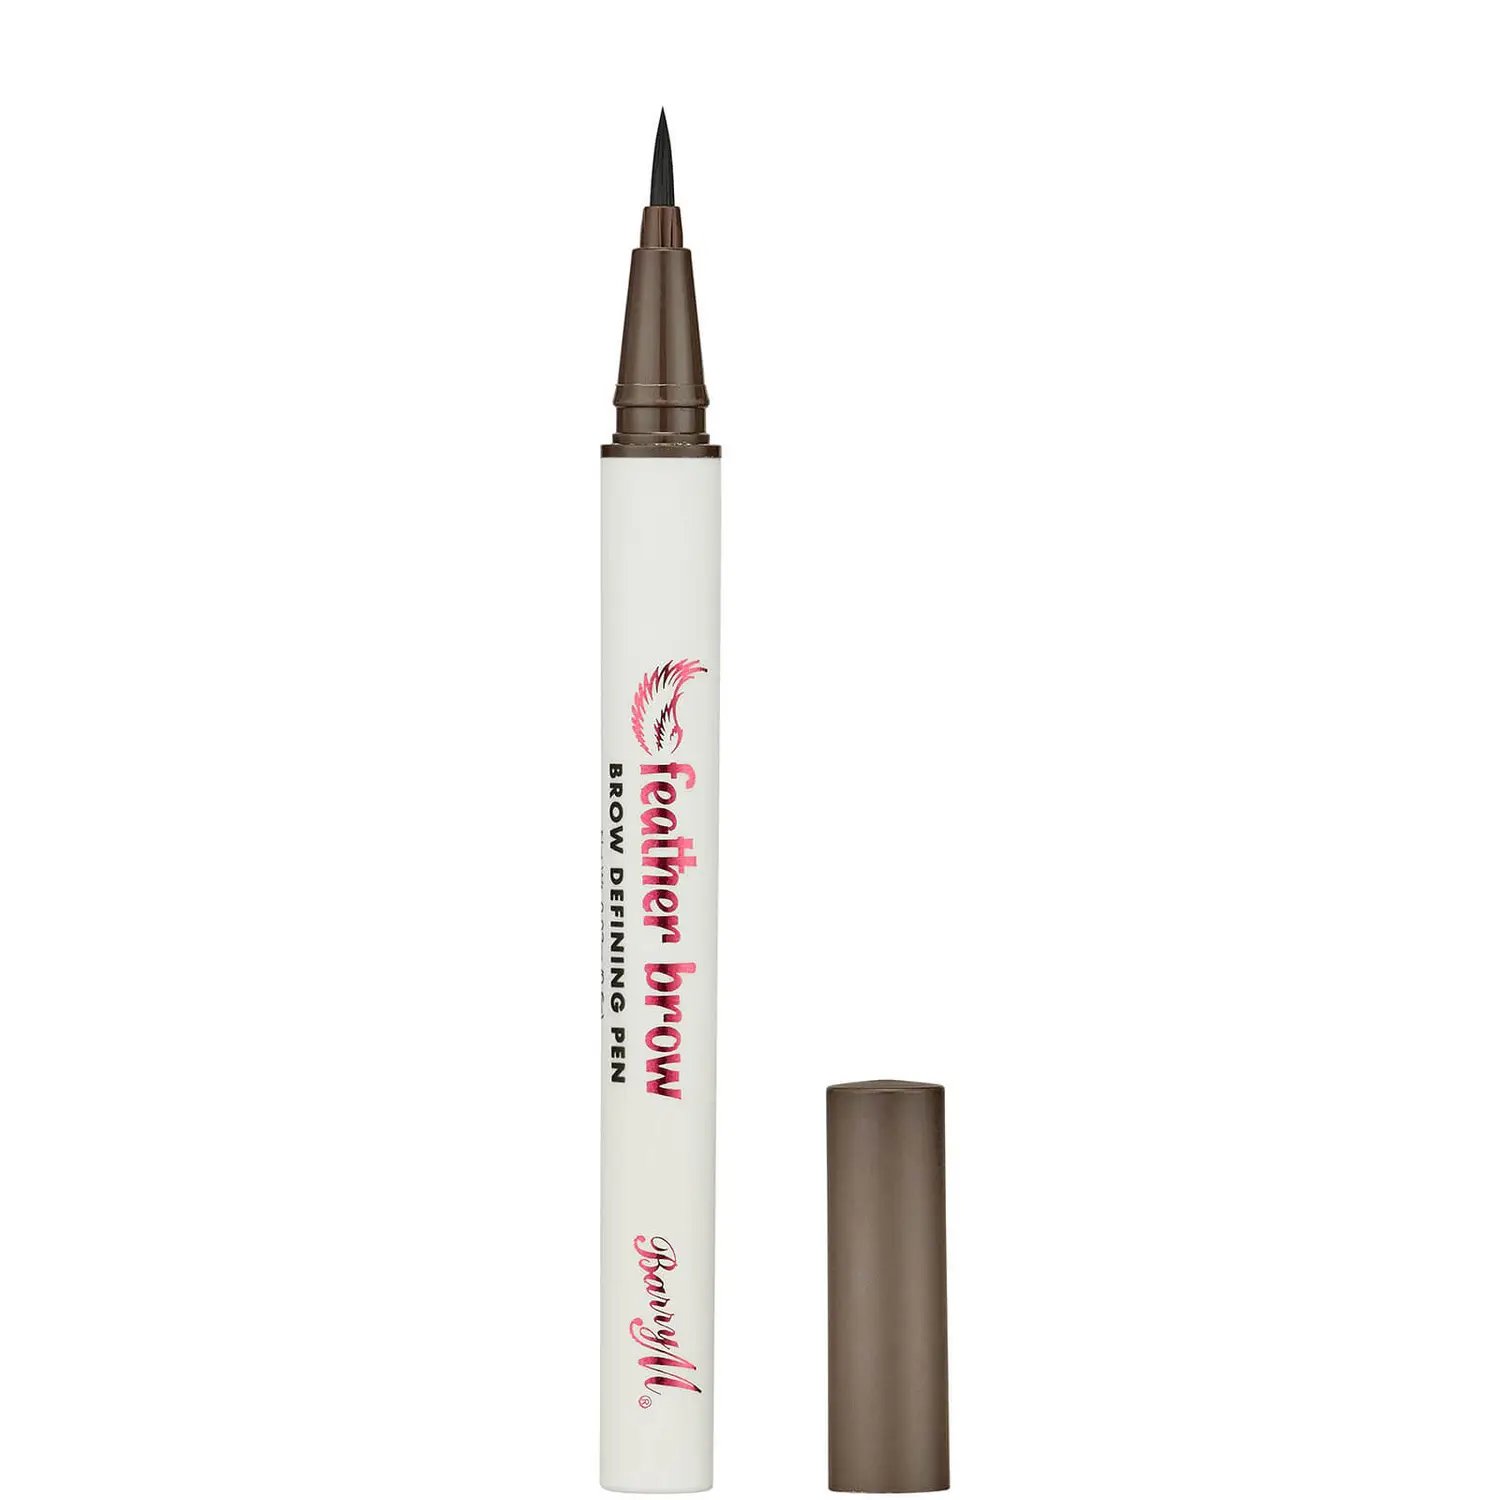 Barry M Cosmetics Feather Brow Brow Defining Pen 0.6ml